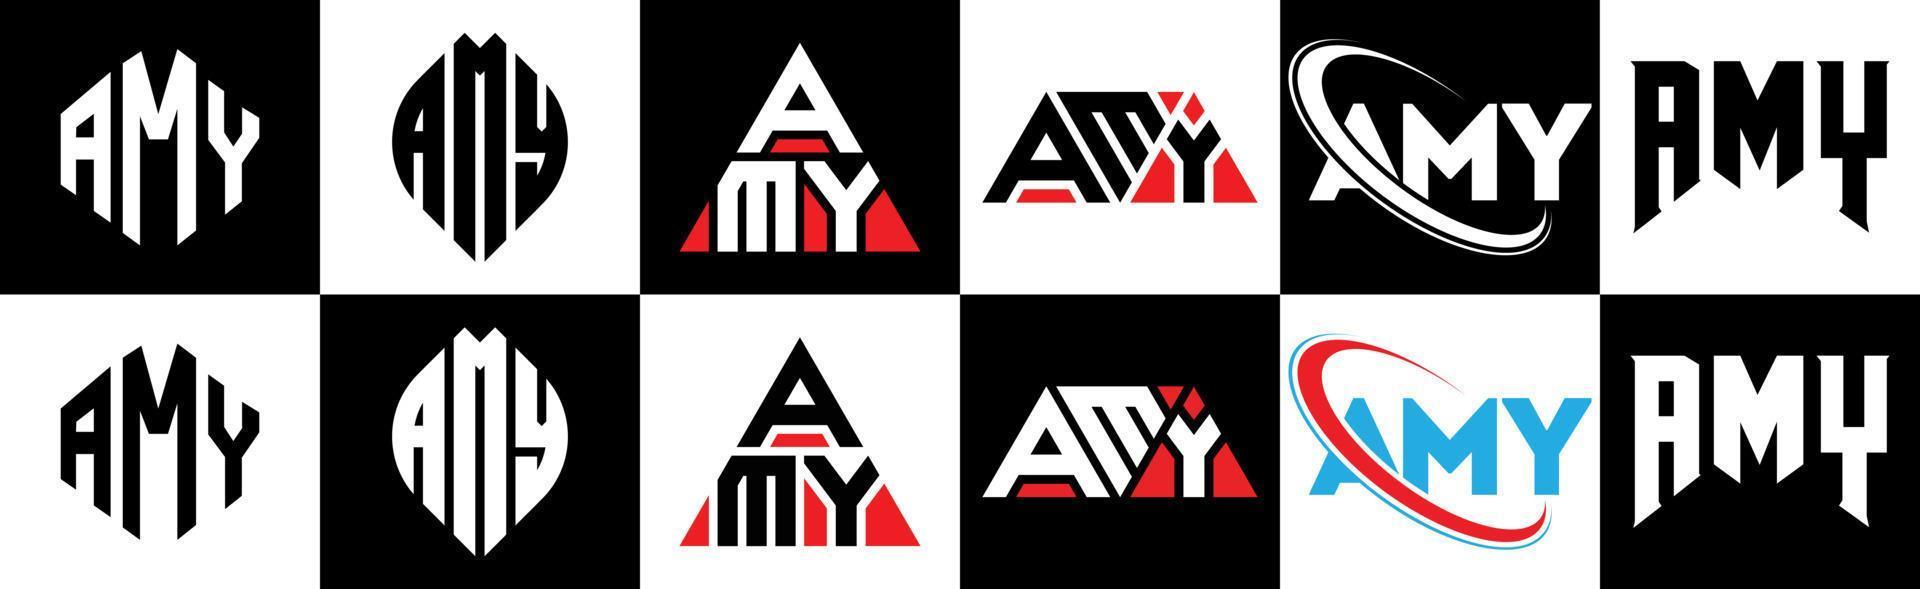 AMY letter logo design in six style. AMY polygon, circle, triangle, hexagon, flat and simple style with black and white color variation letter logo set in one artboard. AMY minimalist and classic logo vector